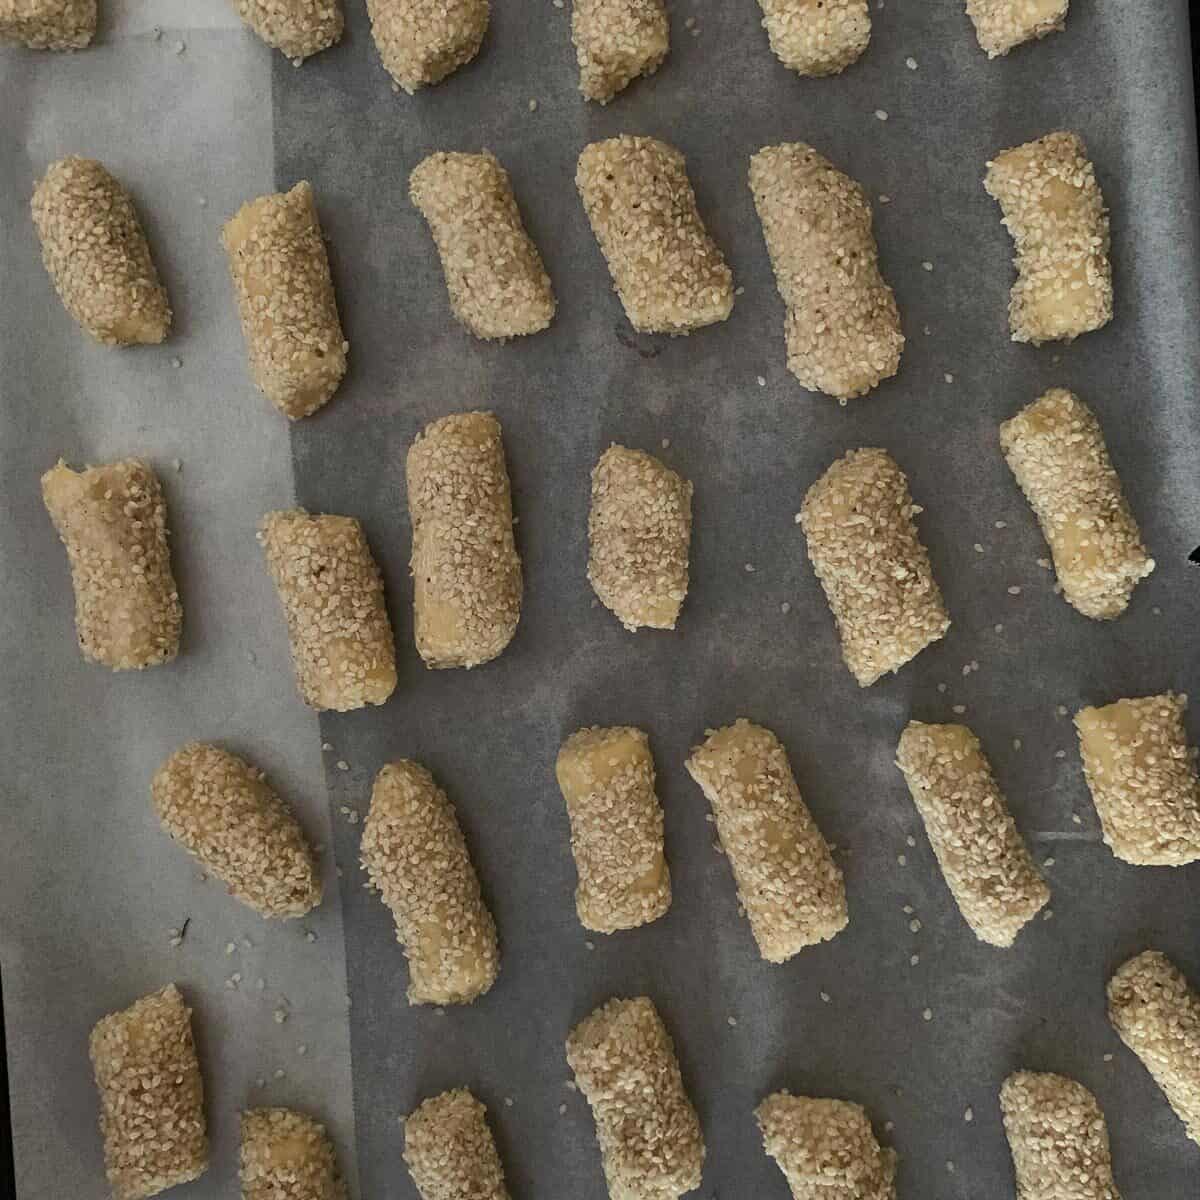 unbaked cookies on parchment lined baking sheet